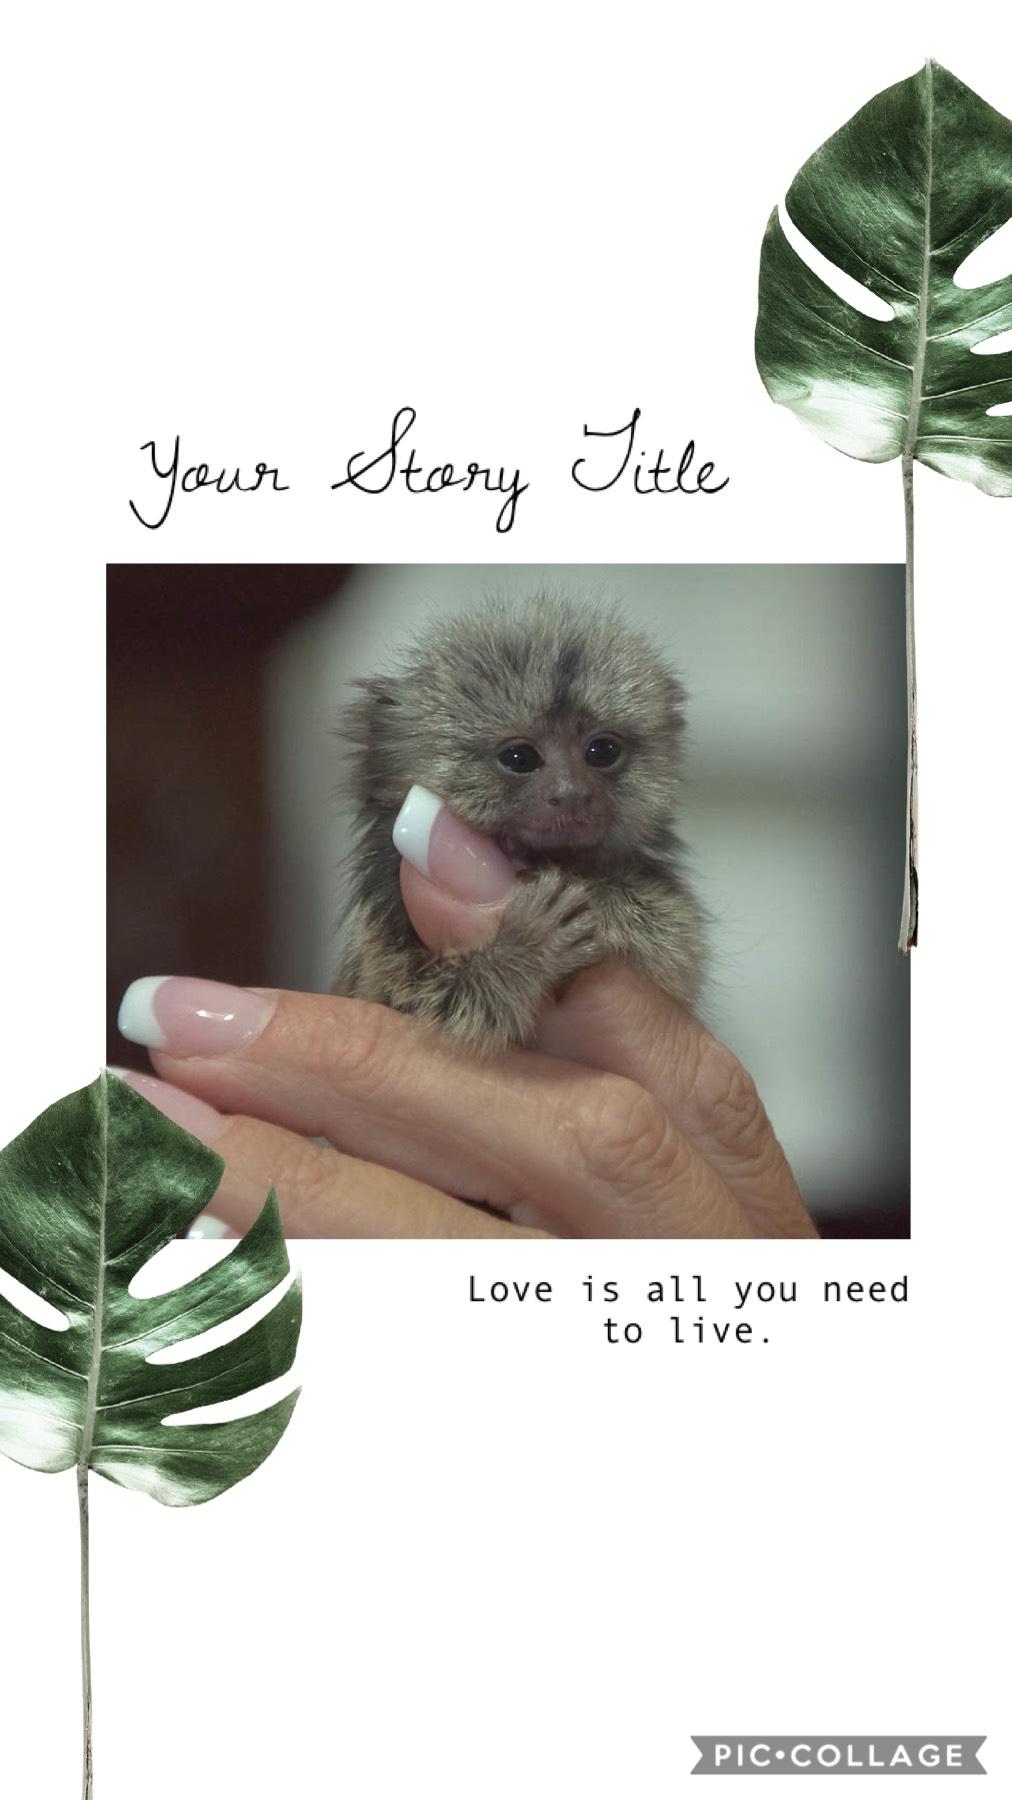 This is a baby Marmoset